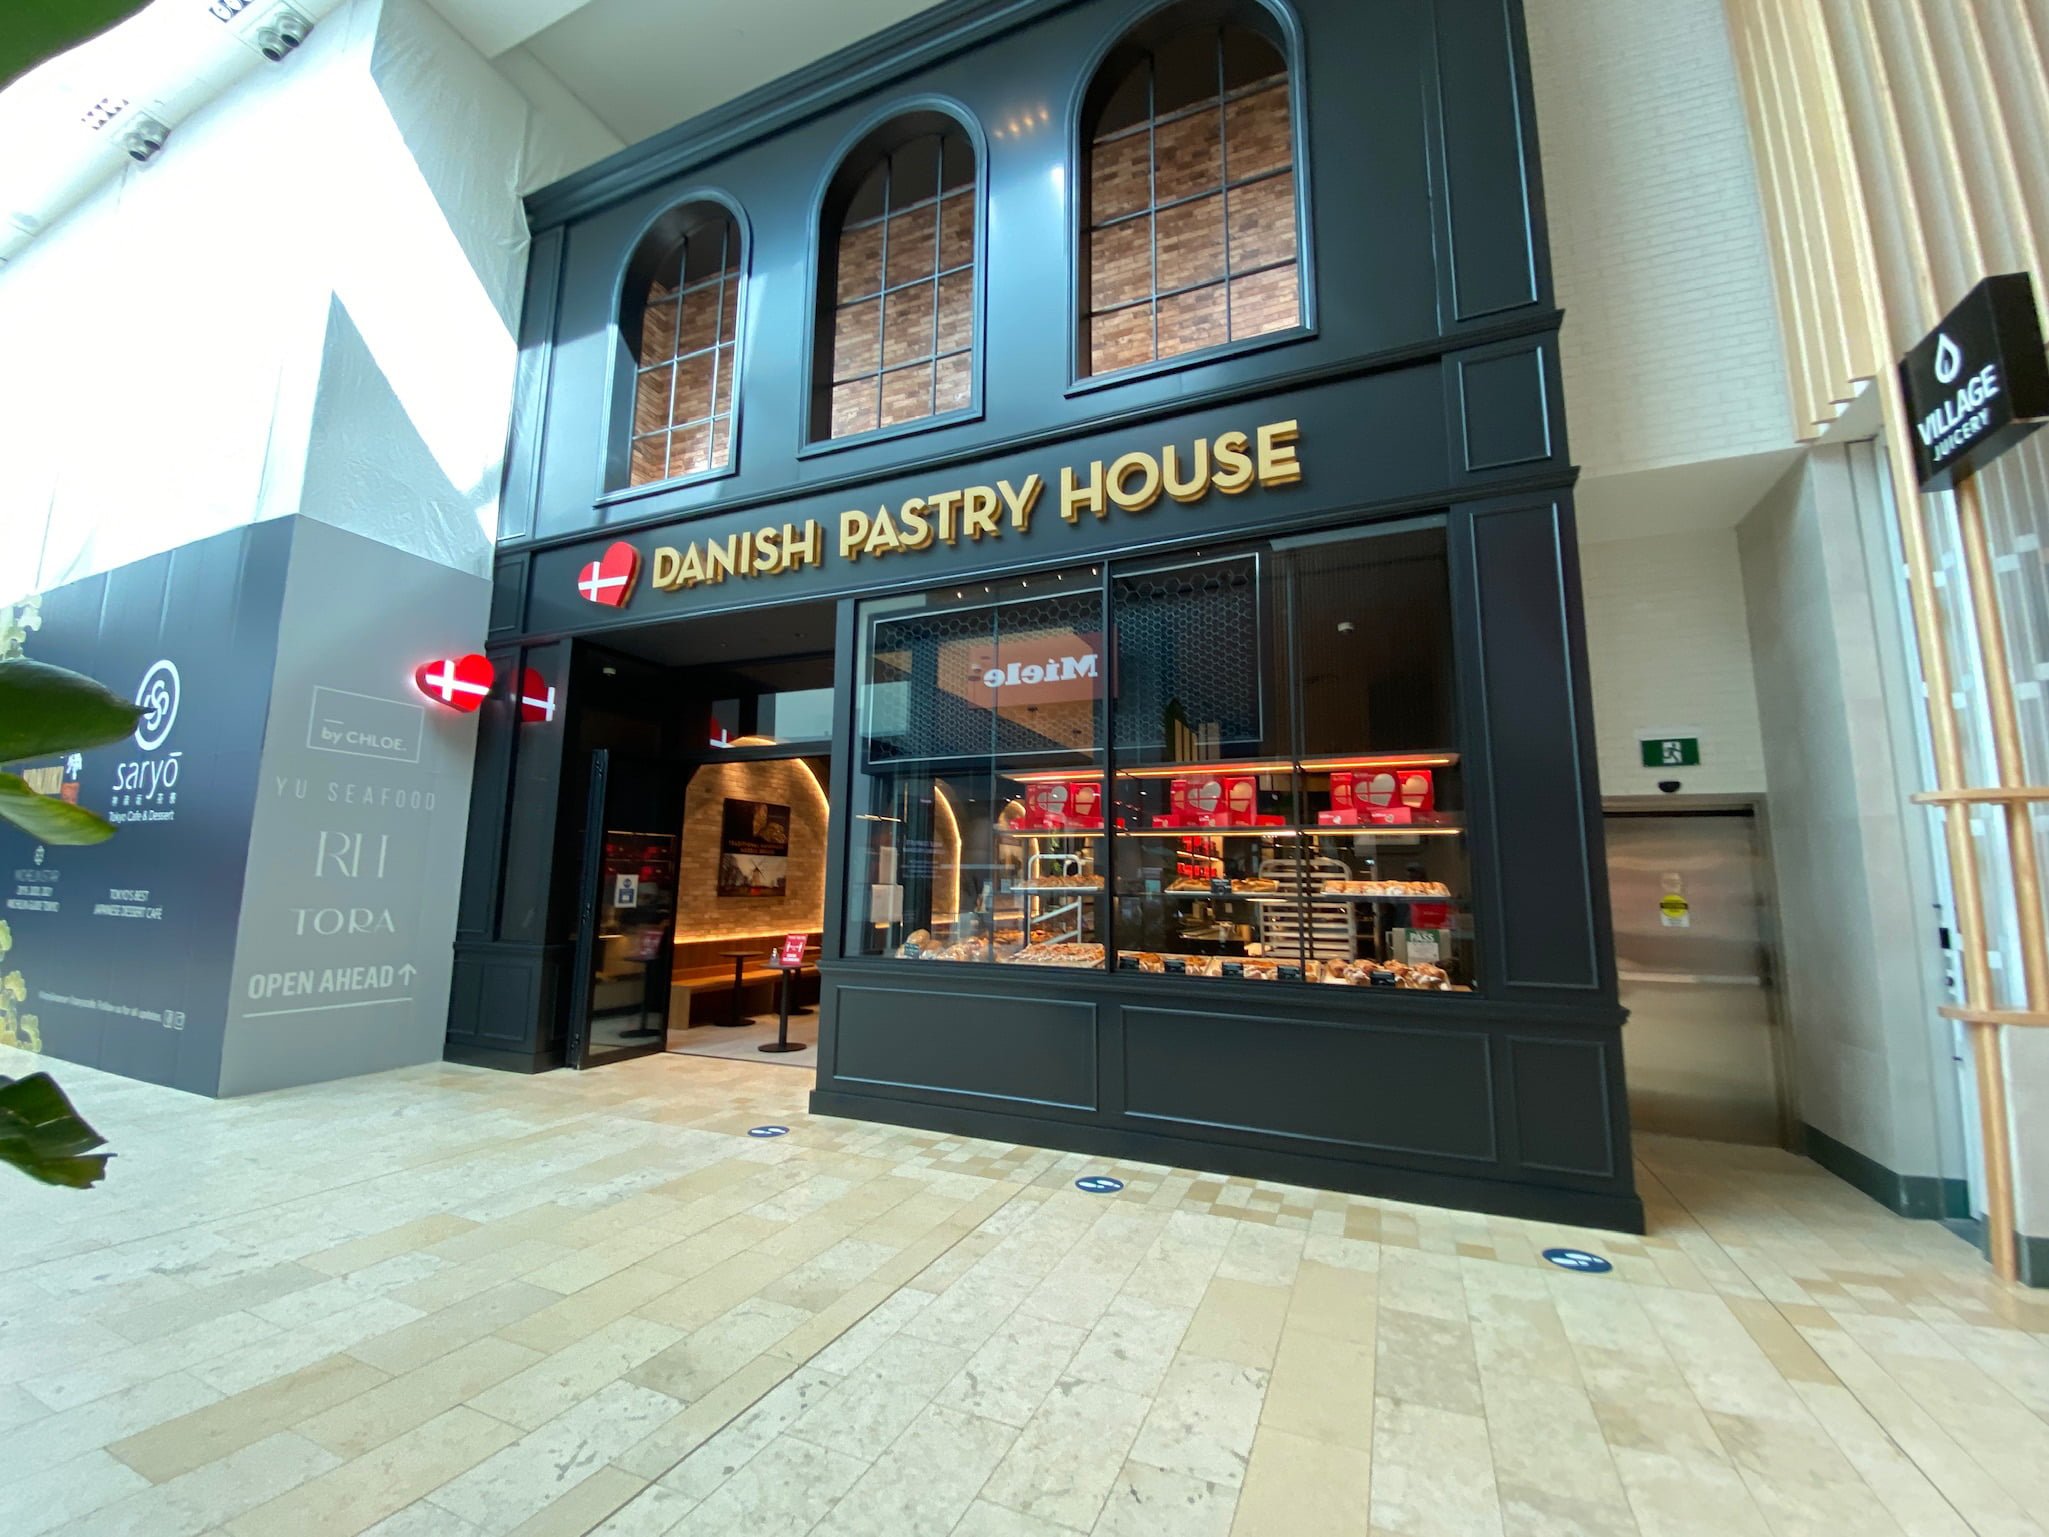 Danish Pastry House at Yorkdale